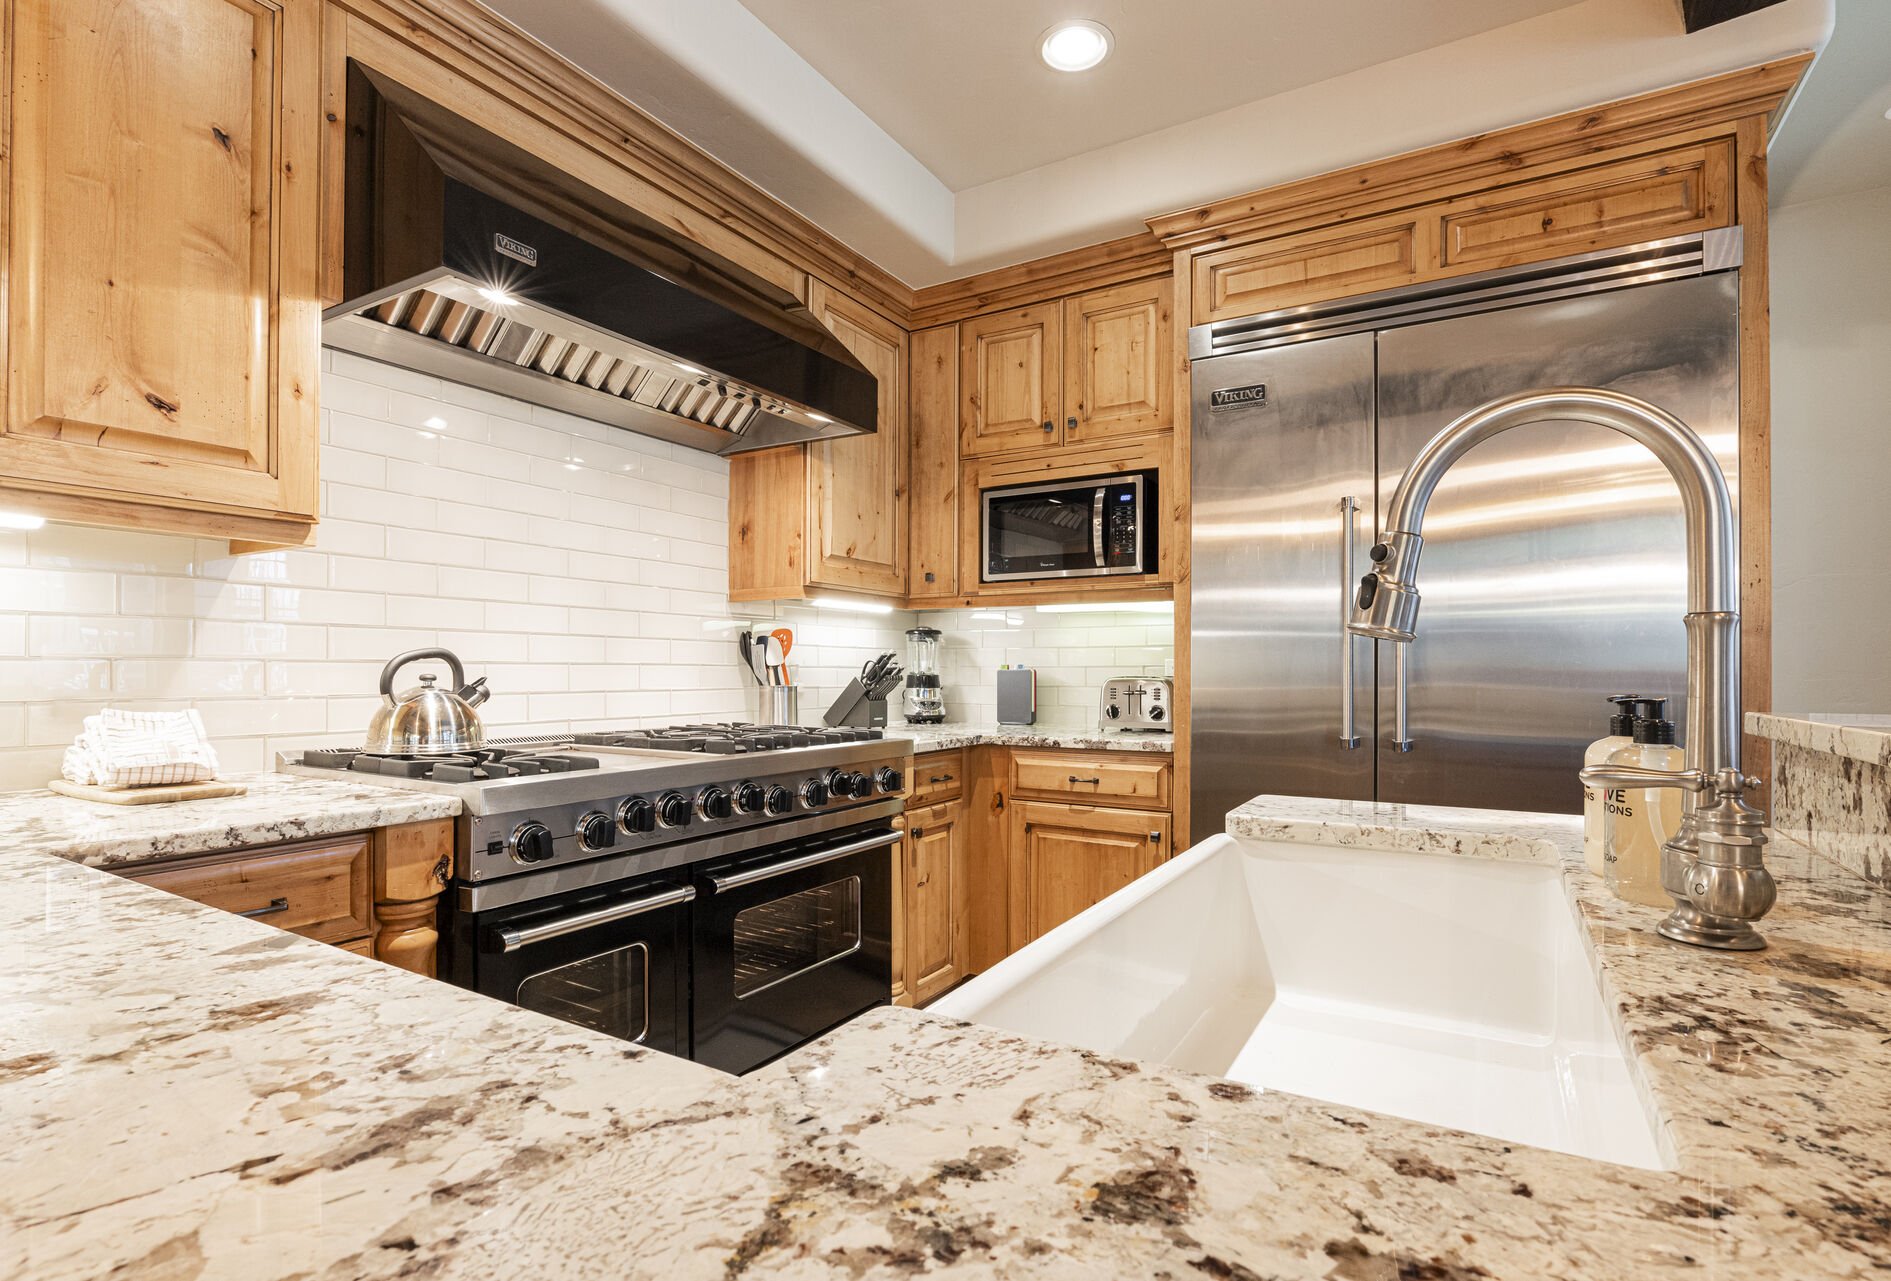 Gourmet Kitchen with Viking Appliances, Including a 6-Burner Gas Range with a Griddle and Double Ovens